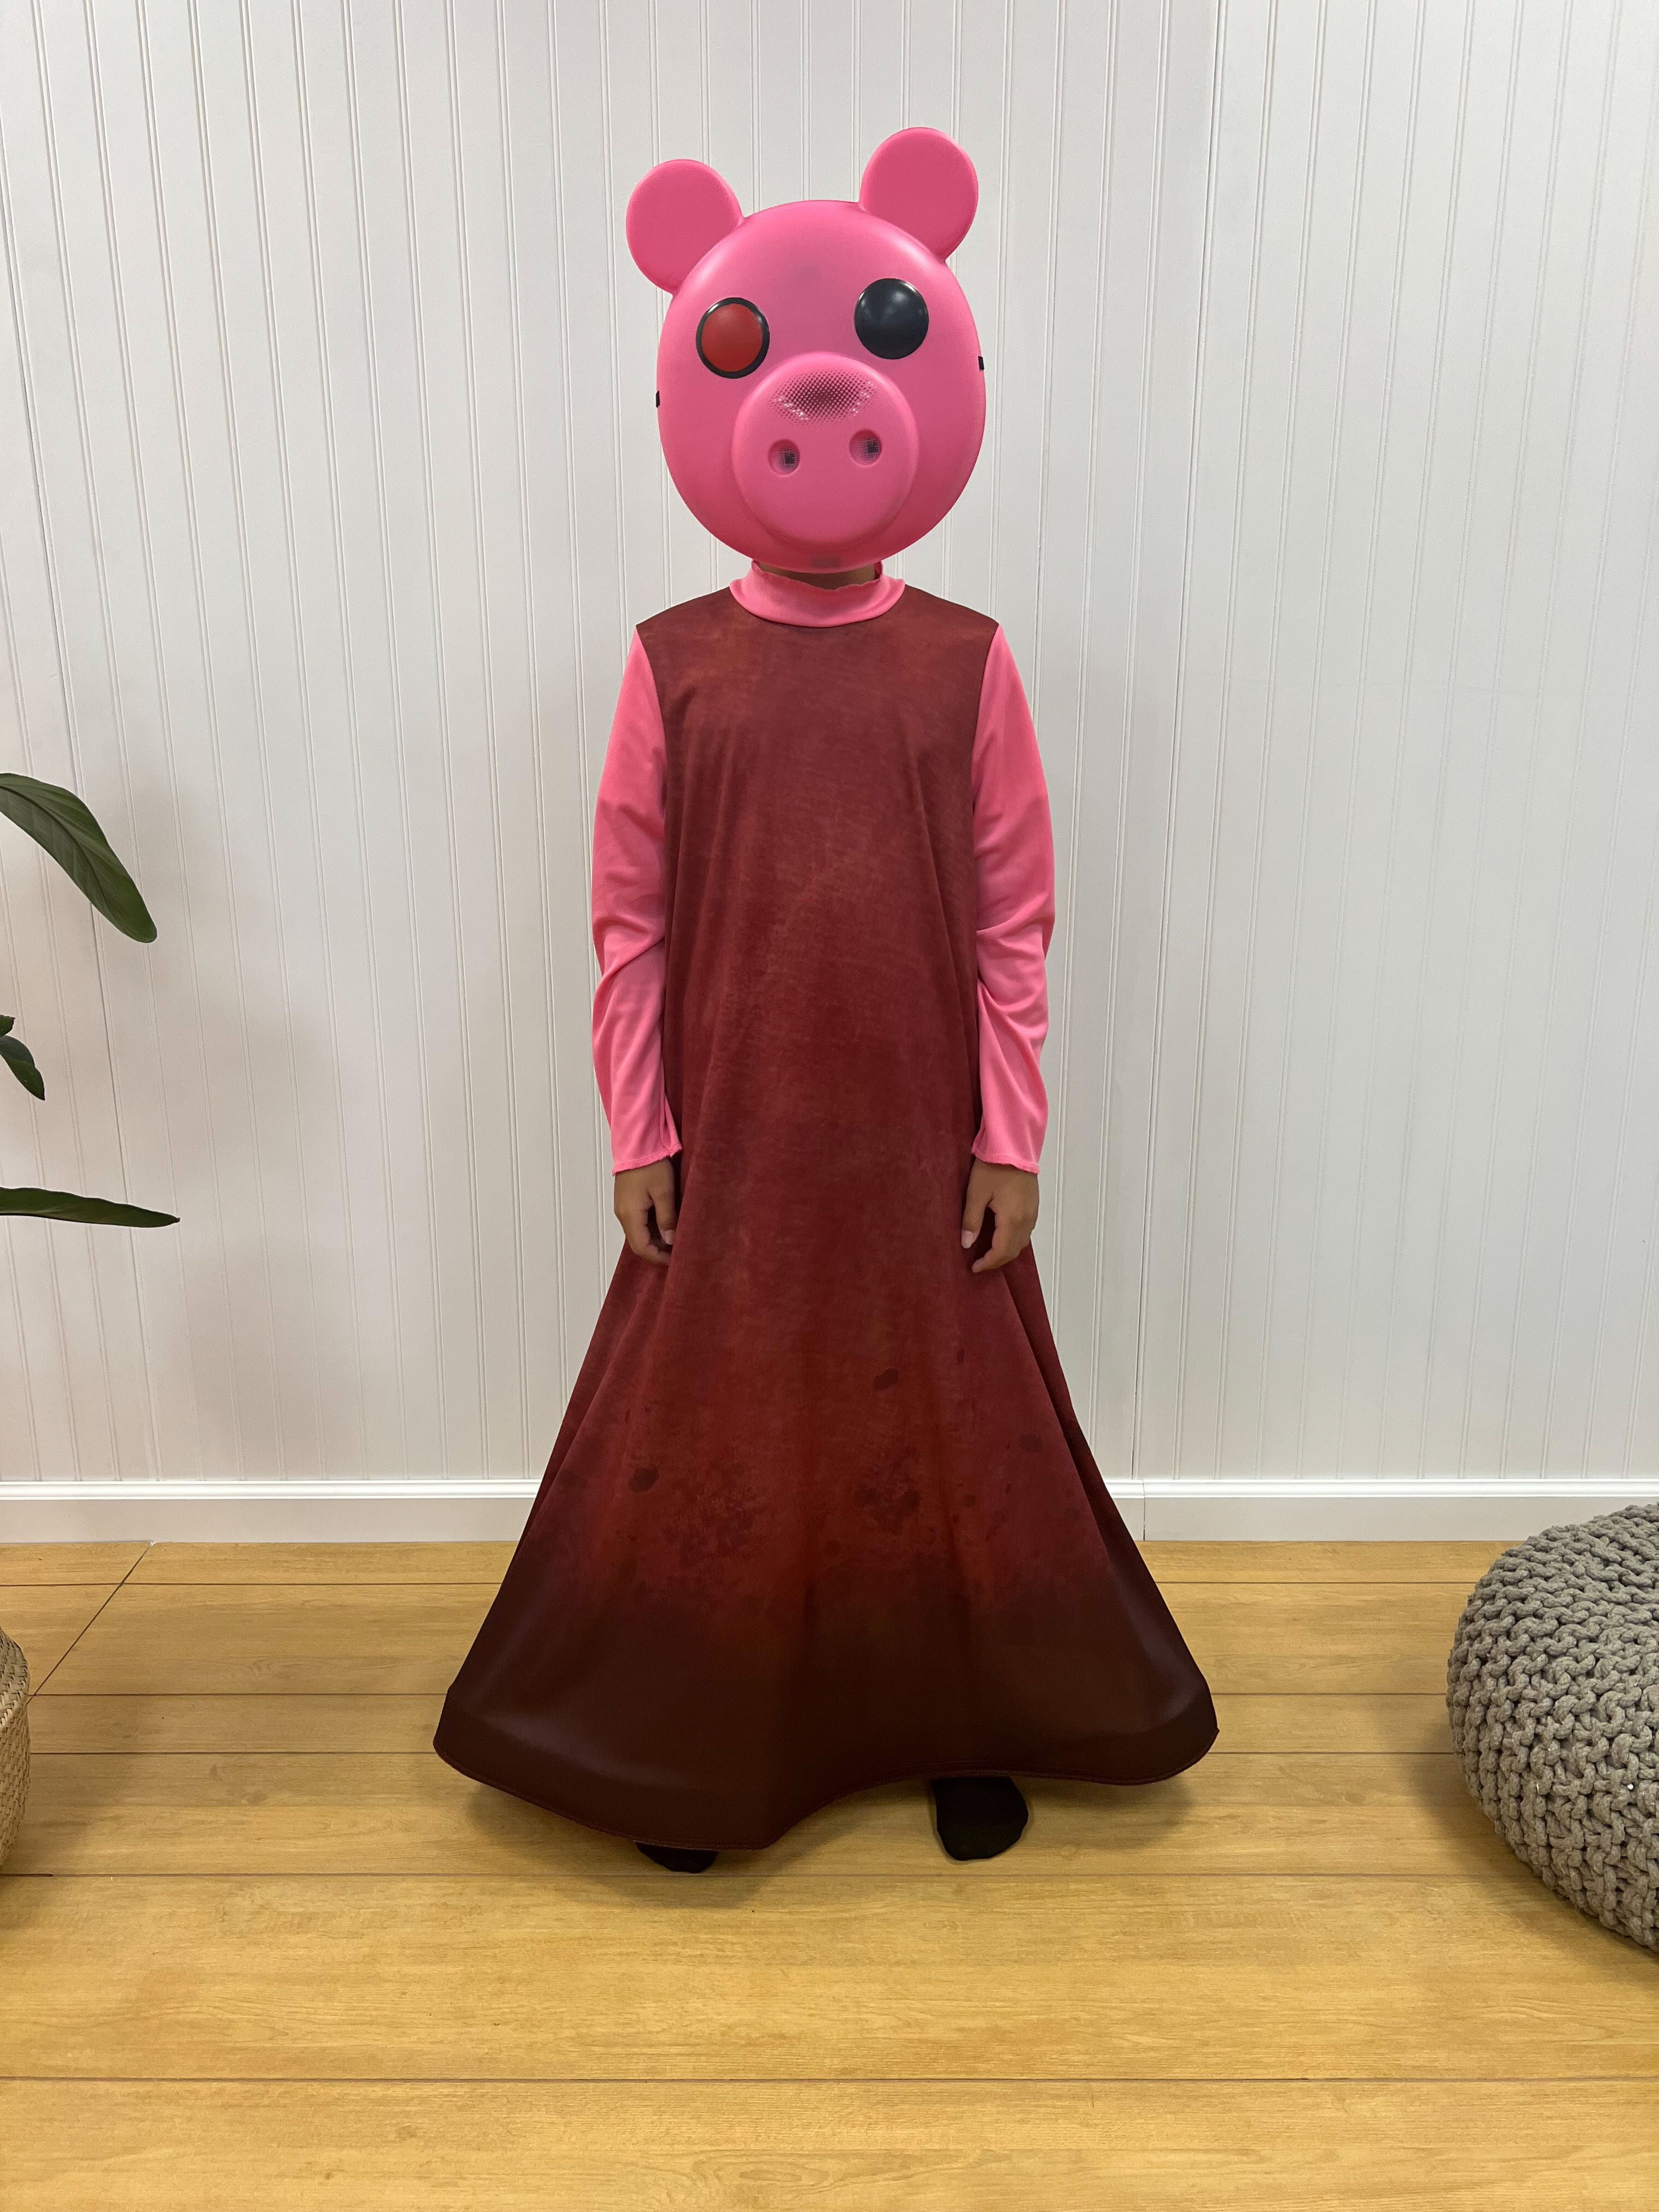 Horror Survival Game 'PIGGY' Getting Halloween Costumes from Disguise